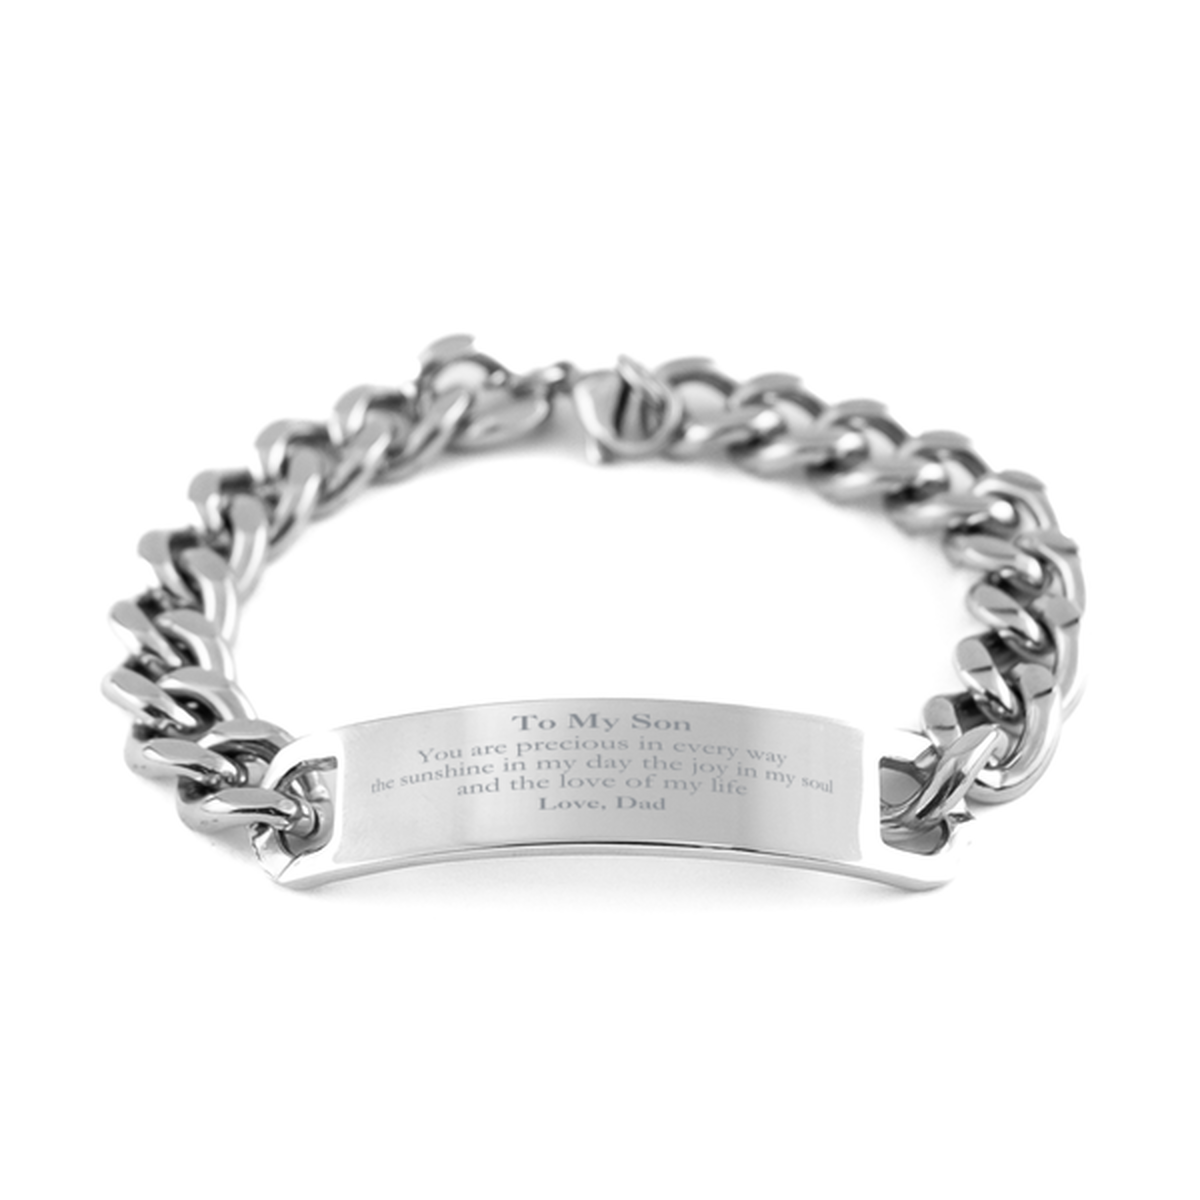 Graduation Gifts for Son Cuban Chain Stainless Steel Bracelet Present from Dad, Christmas Son Birthday Gifts Son You are precious in every way the sunshine in my day. Love, Dad